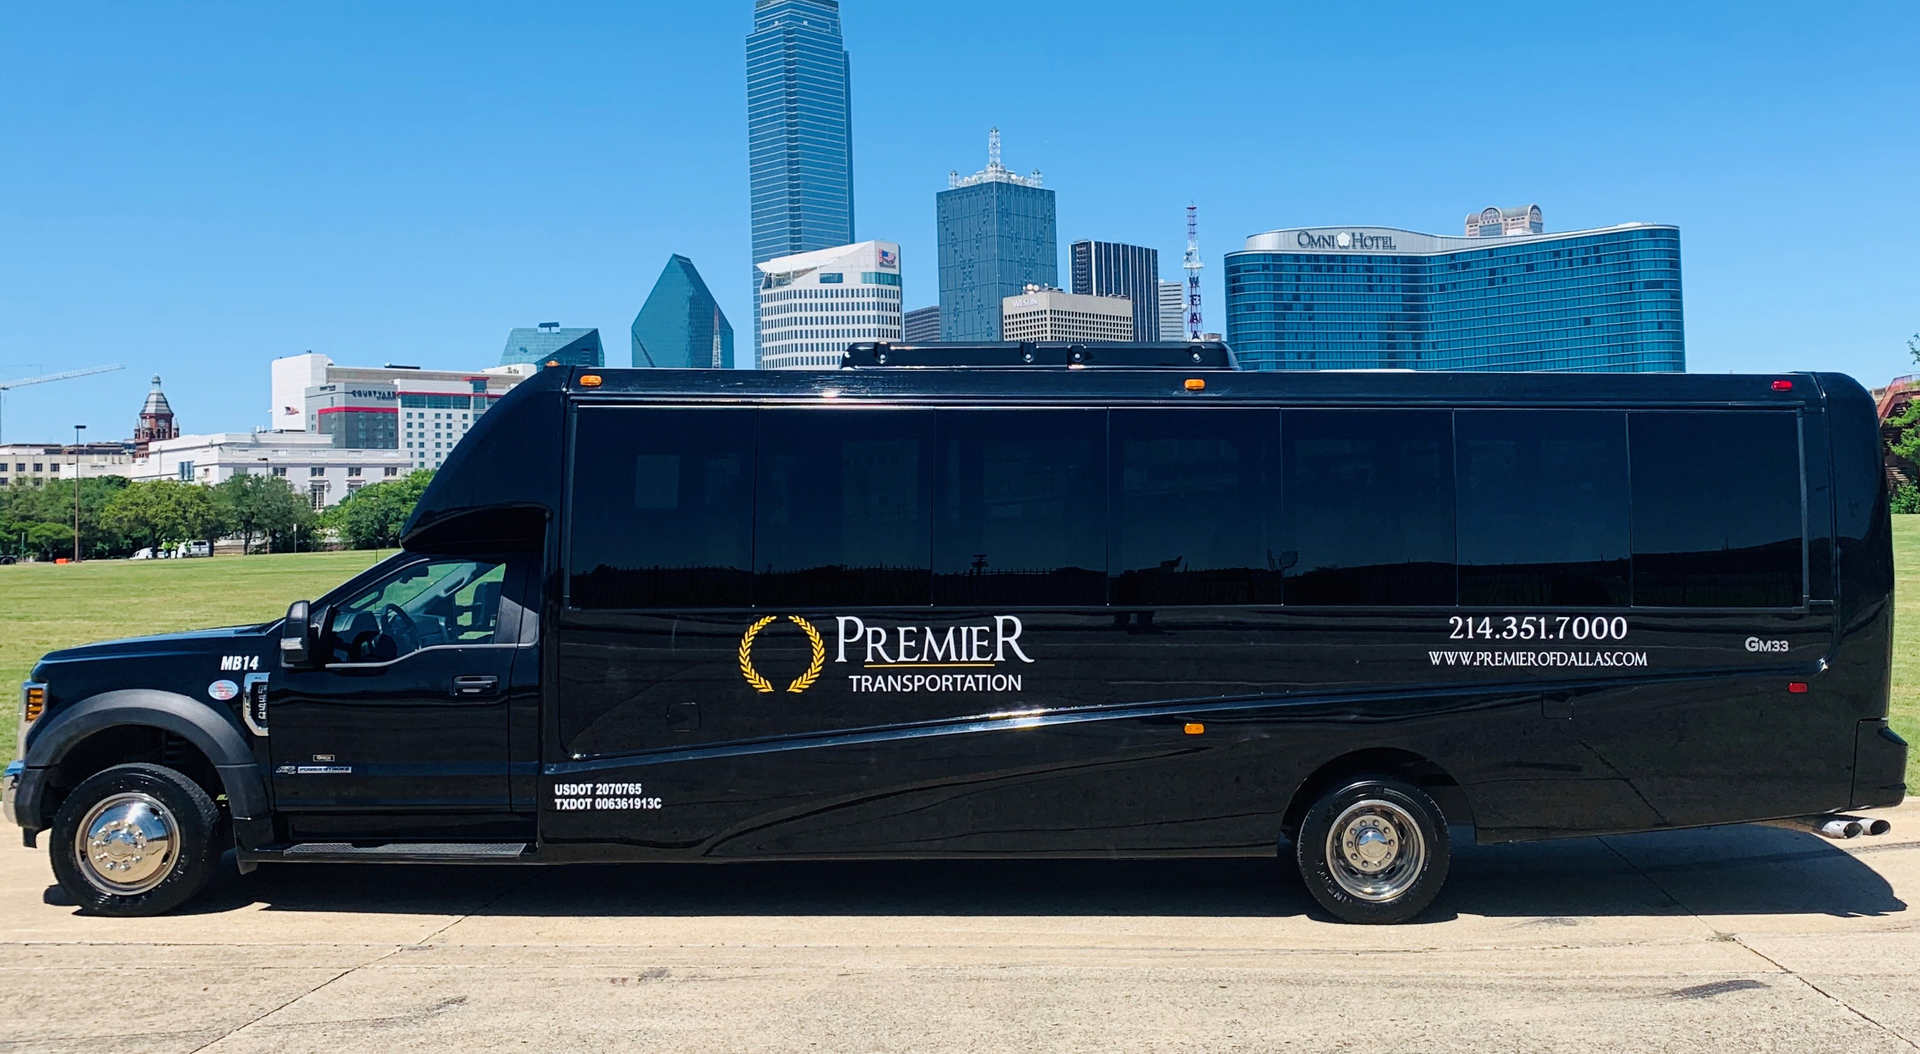 premier's black shuttle bus is parked in front of a city skyline